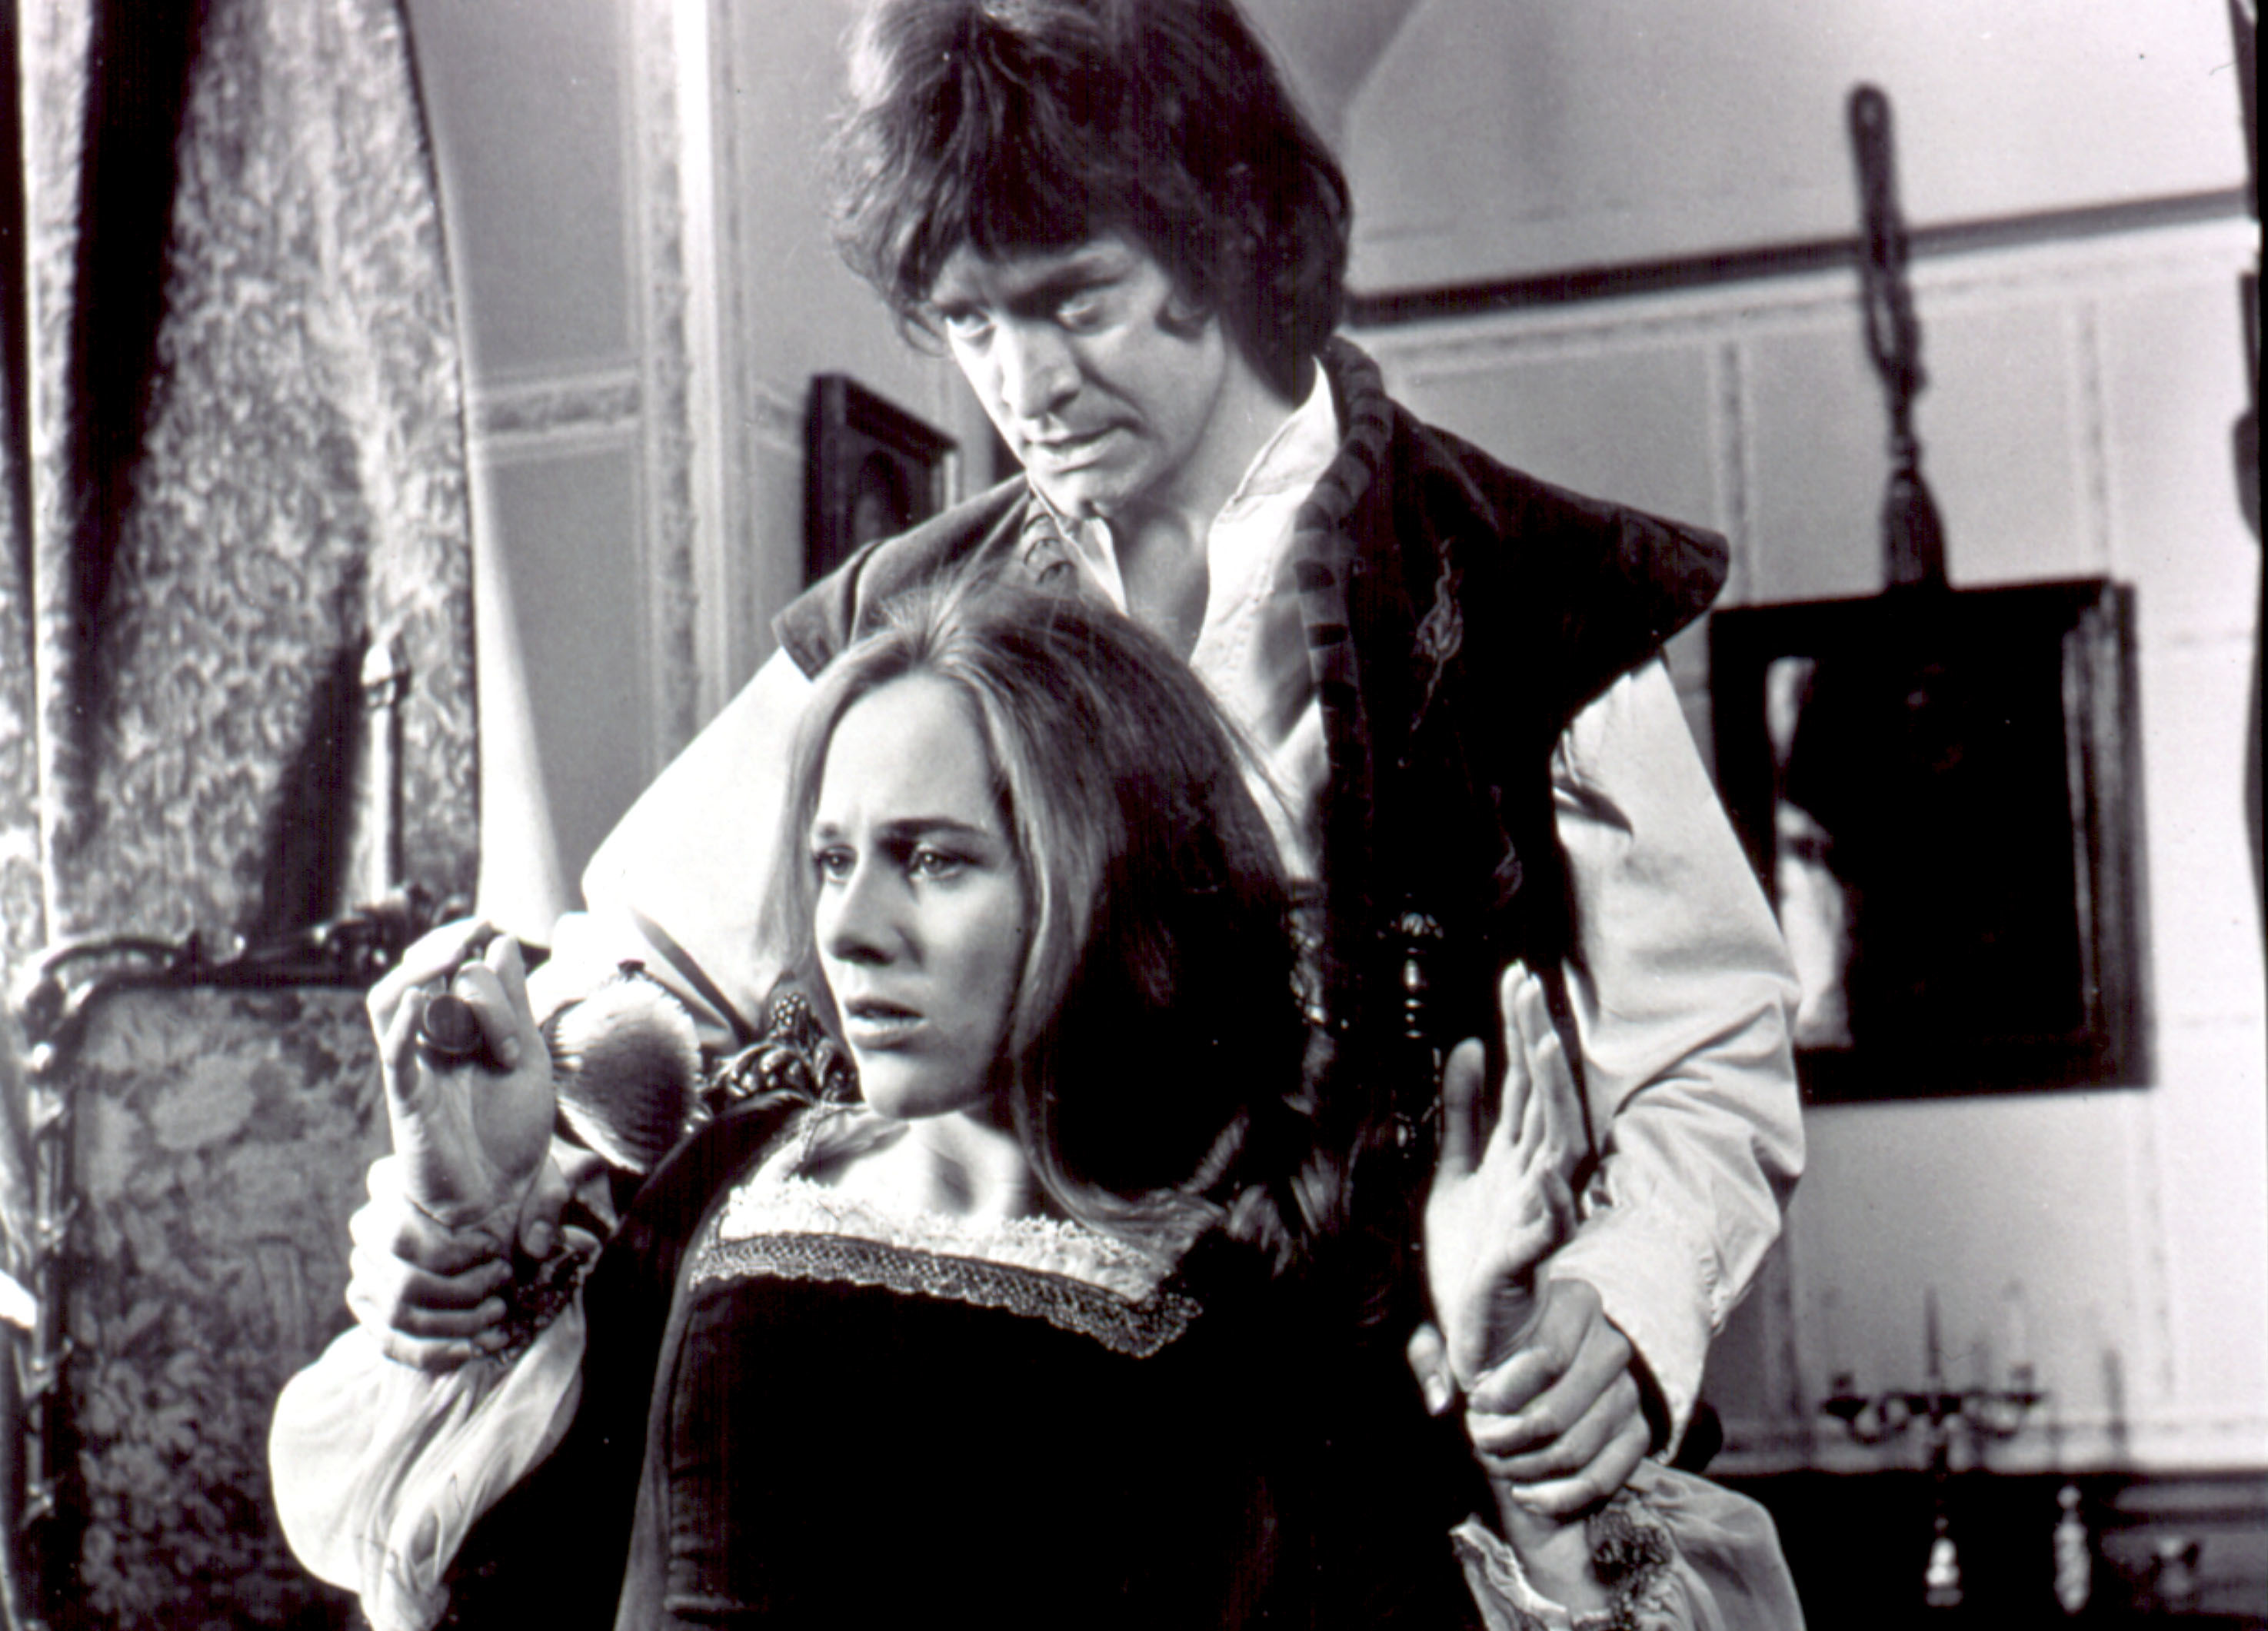 <p>English actress Hilary Heath (also known as Hilary Dwyer) passed away on March 30 from complications related to COVID-19. She was 74. Hilary landed roles in films including 1968's "Witchfinder General" and 1970's "Wuthering Heights." The Liverpool native was best known for her many appearances in horror films in the late 1960s and early 1970s. She's seen here in the 1970 horror movie "Cry of the Banshee."</p>